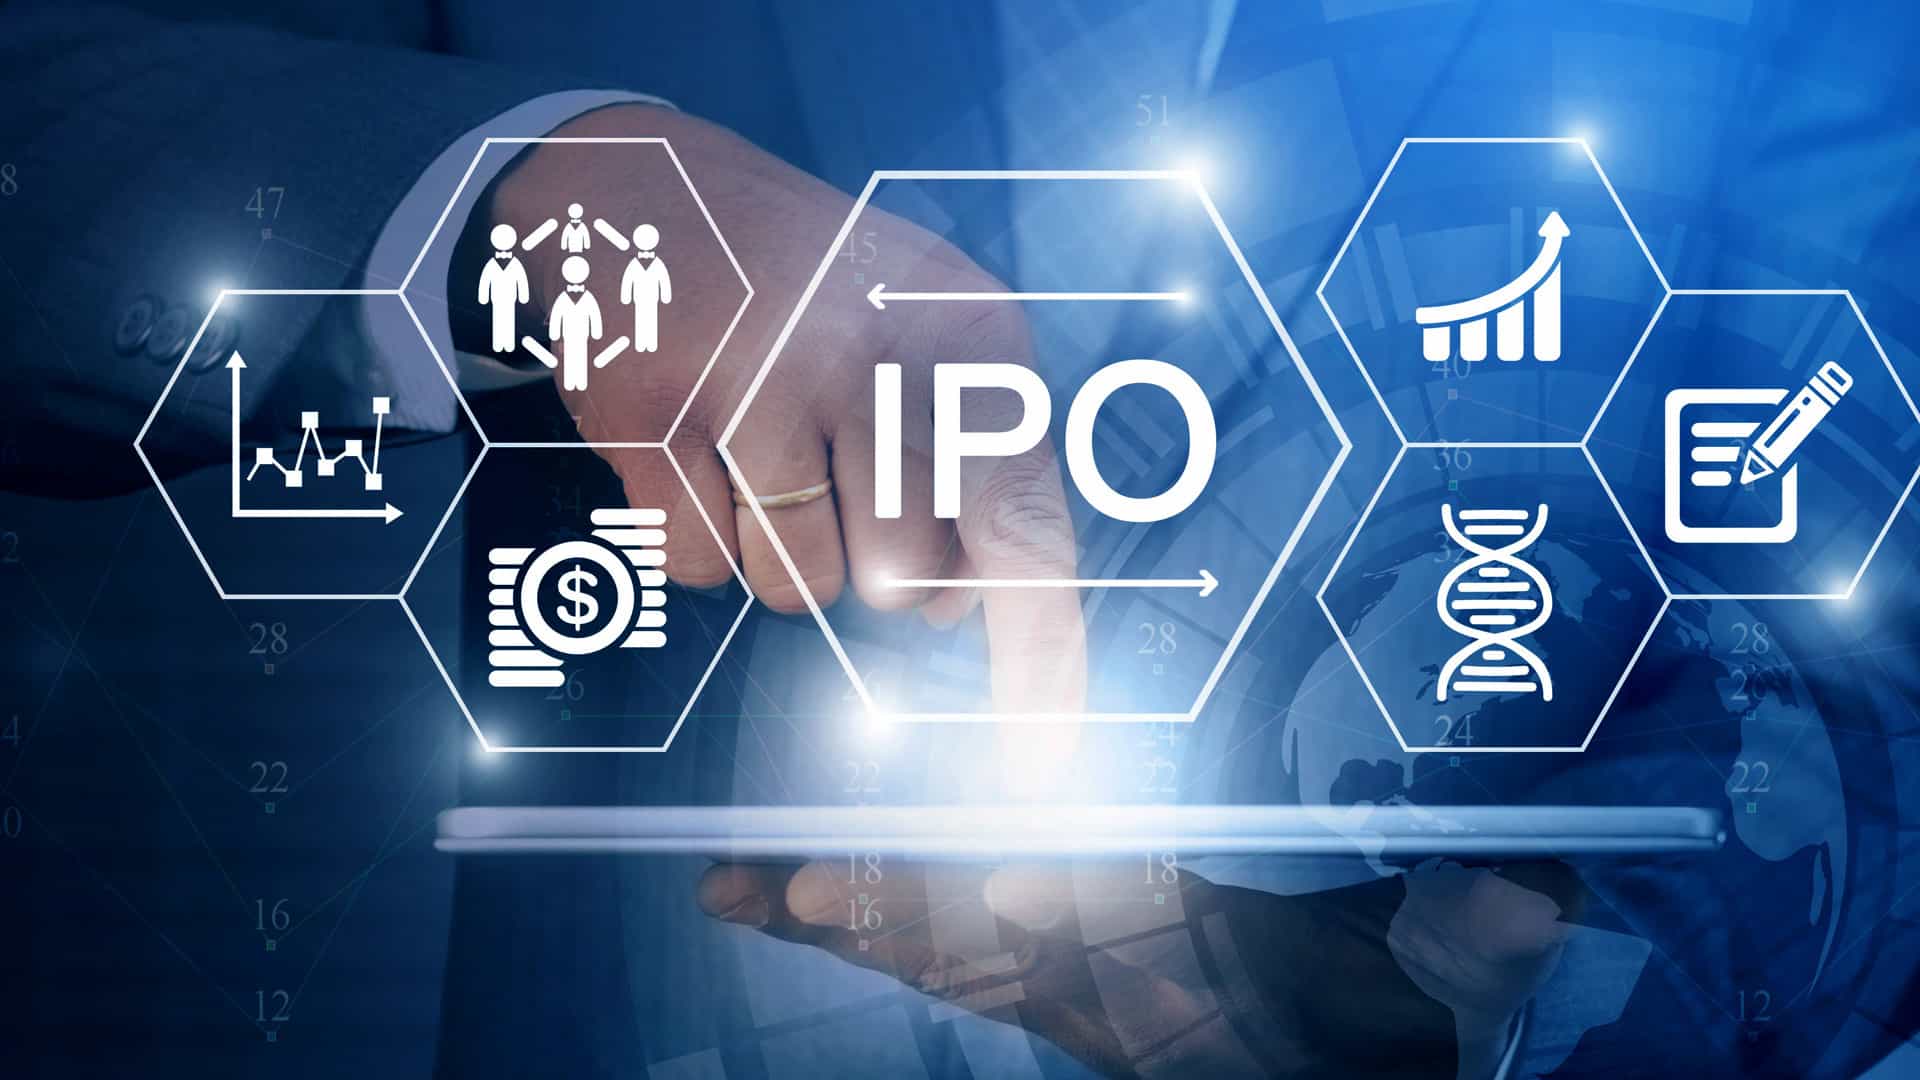 Maiden Forgings to launch IPO next week; aims to raise Rs 24 crore